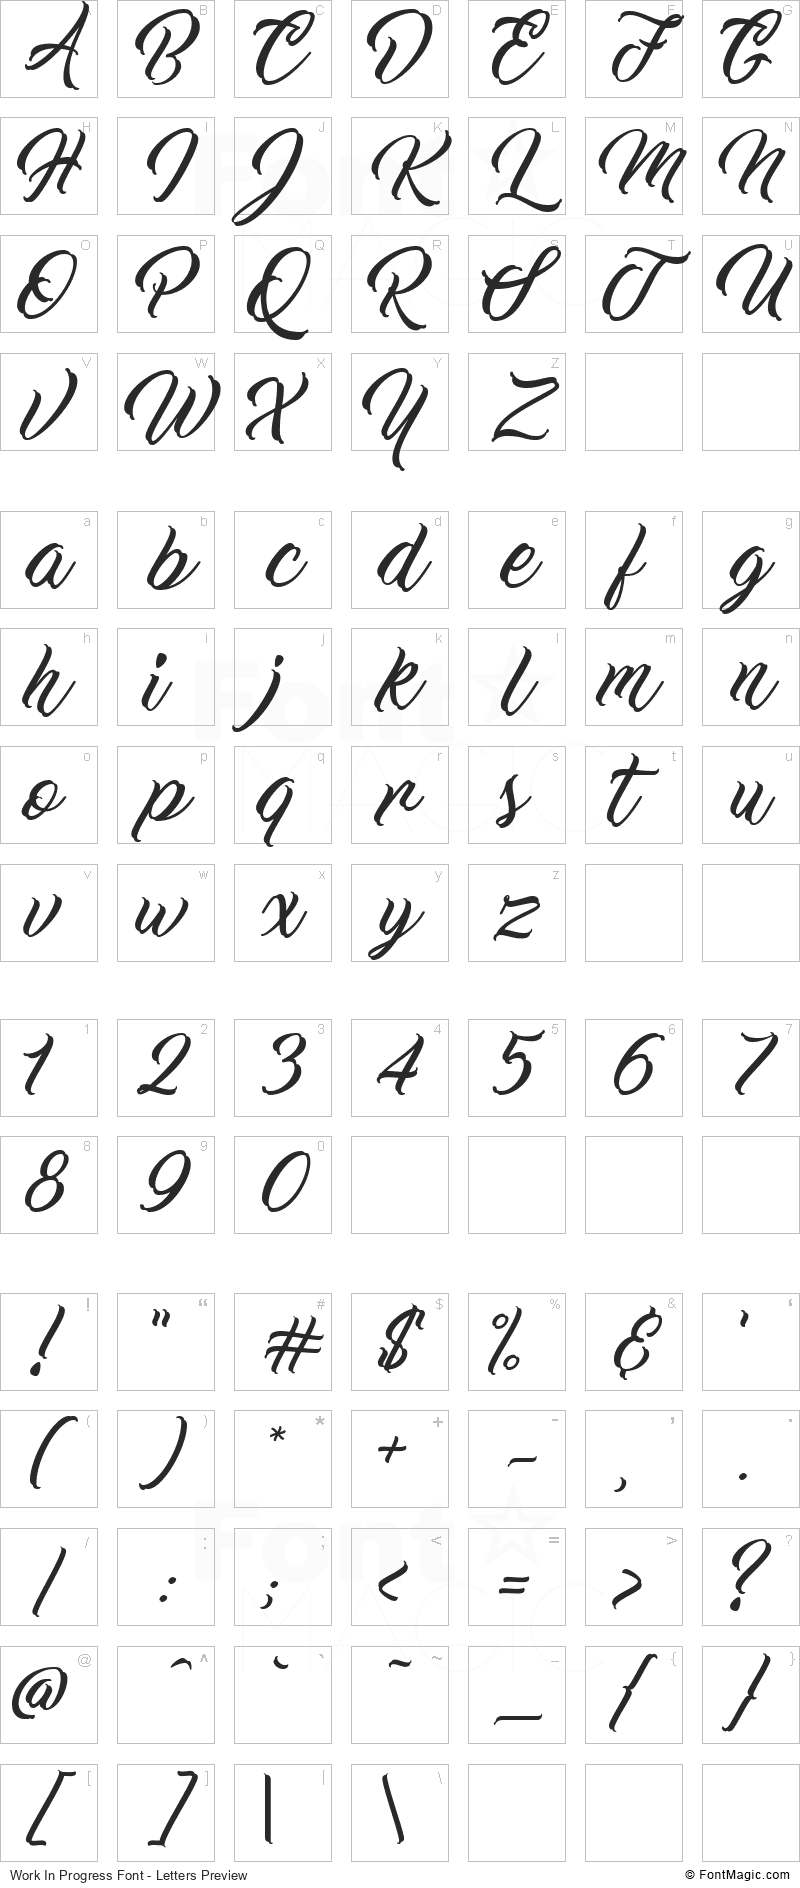 Work In Progress Font - All Latters Preview Chart